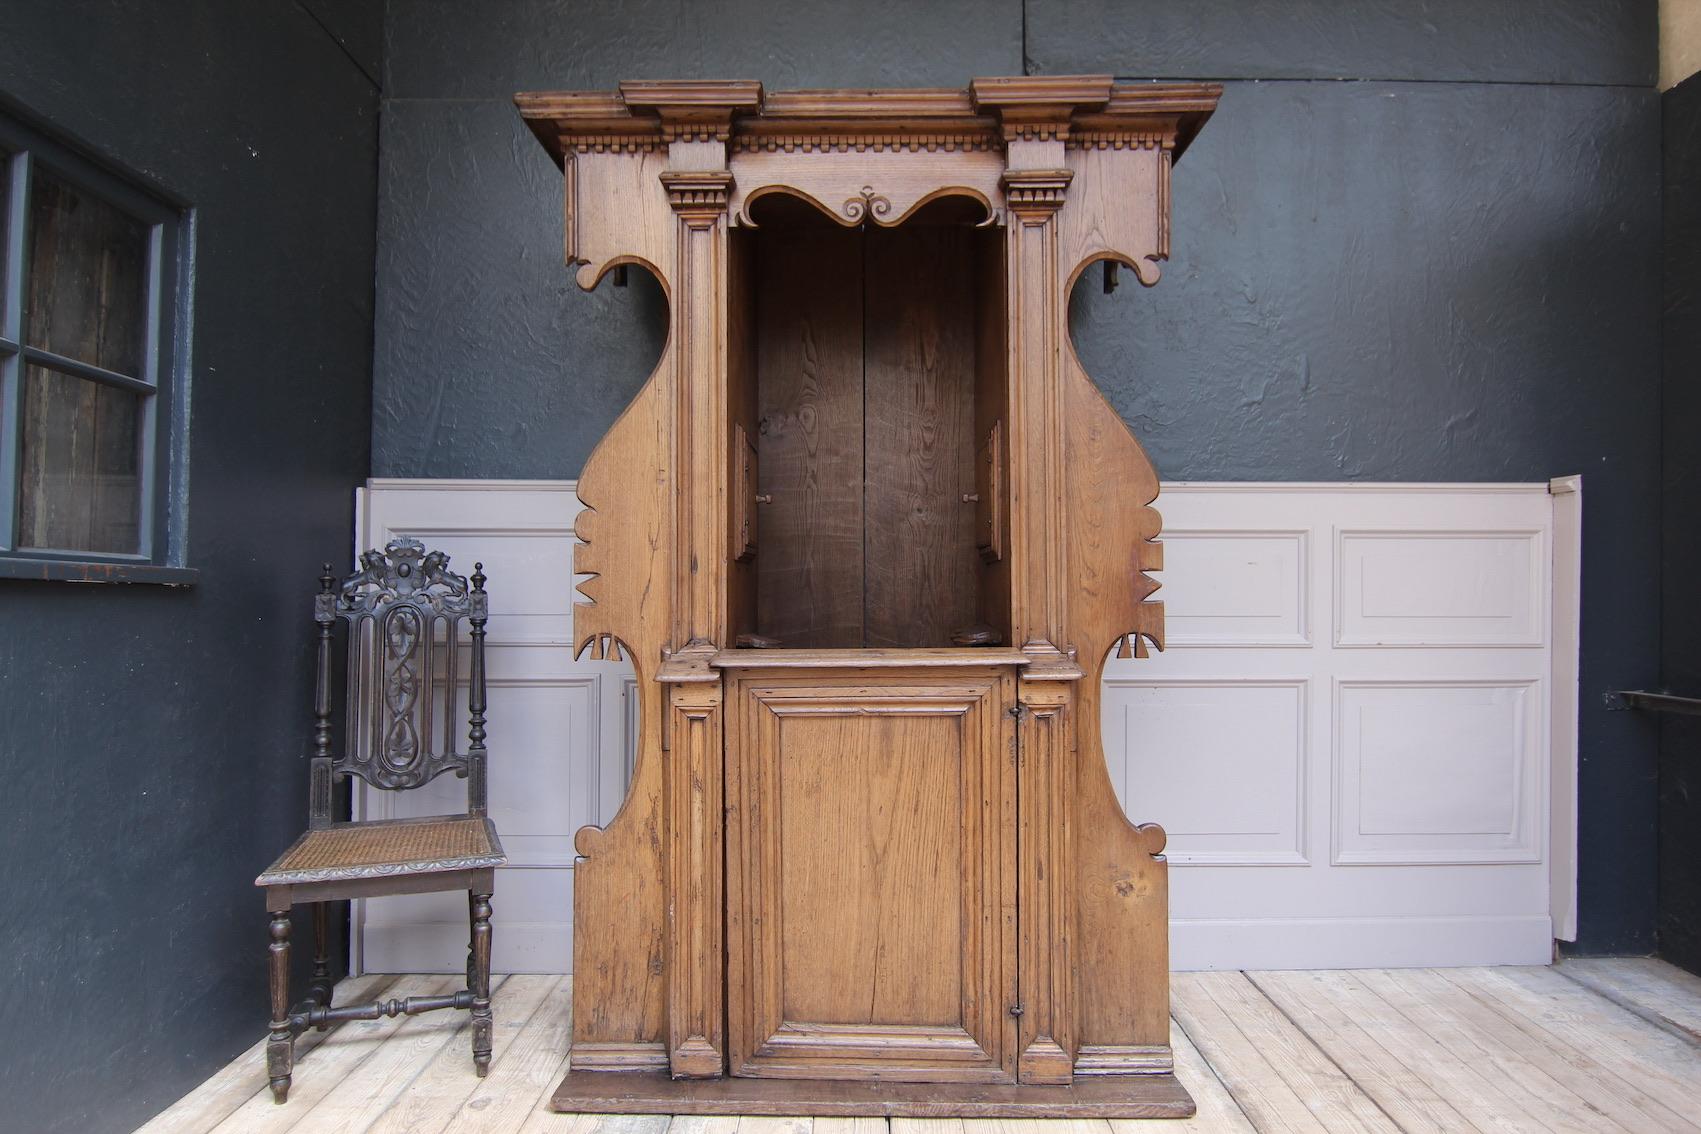 Original 17th century renaissance confessional from Vicopisano in Tuscany. Made of solid oak.

It is a confessional that can be entered from both sides. In the middle is the place for the clergyman who made the confession of the 